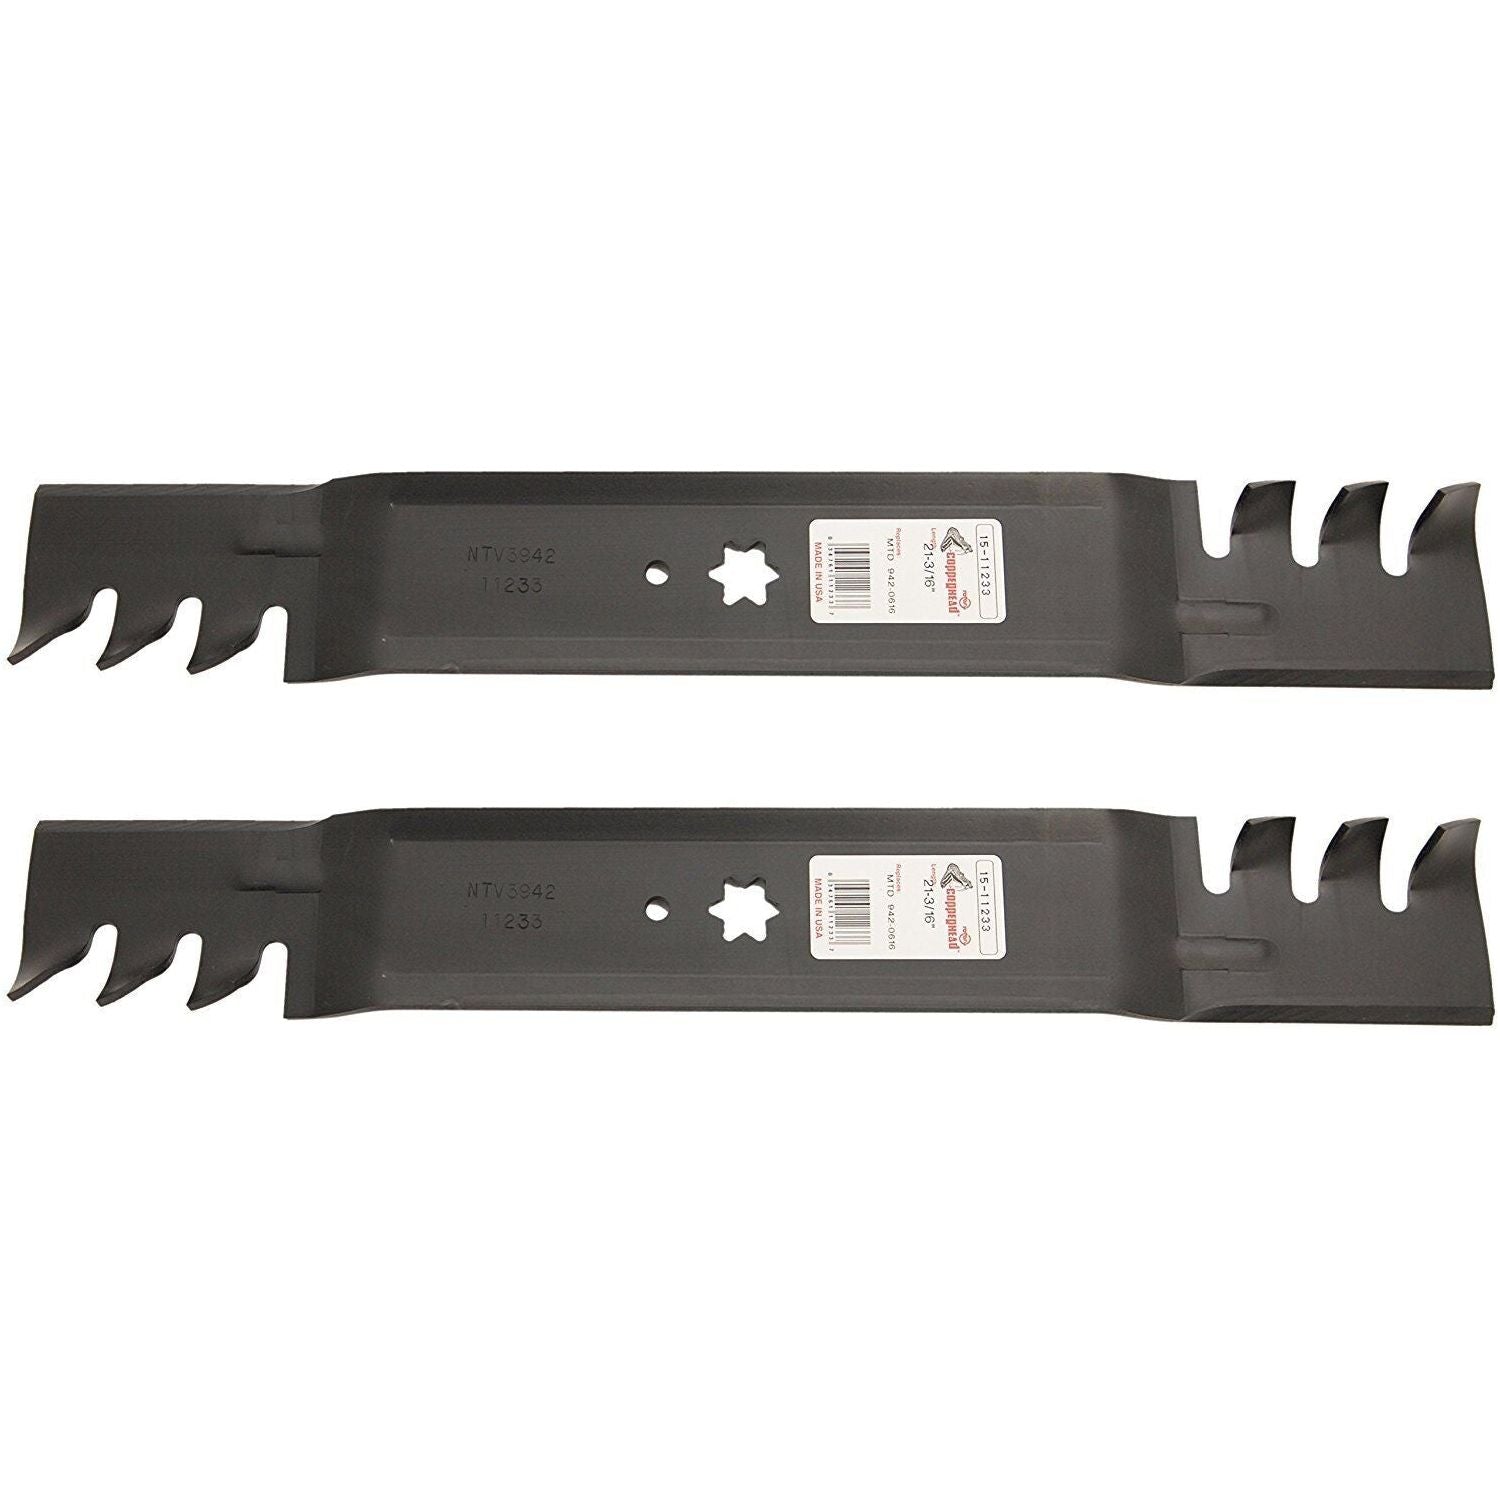 2 Pack of Rotary BLADE 21-3/16" X 6 POINT STAR MTD COMMERCIAL MULCHING Compatible with : 742-04126, 742-0616, 742P04308X, 942-04126, 942-04126-X, 942-04308-X